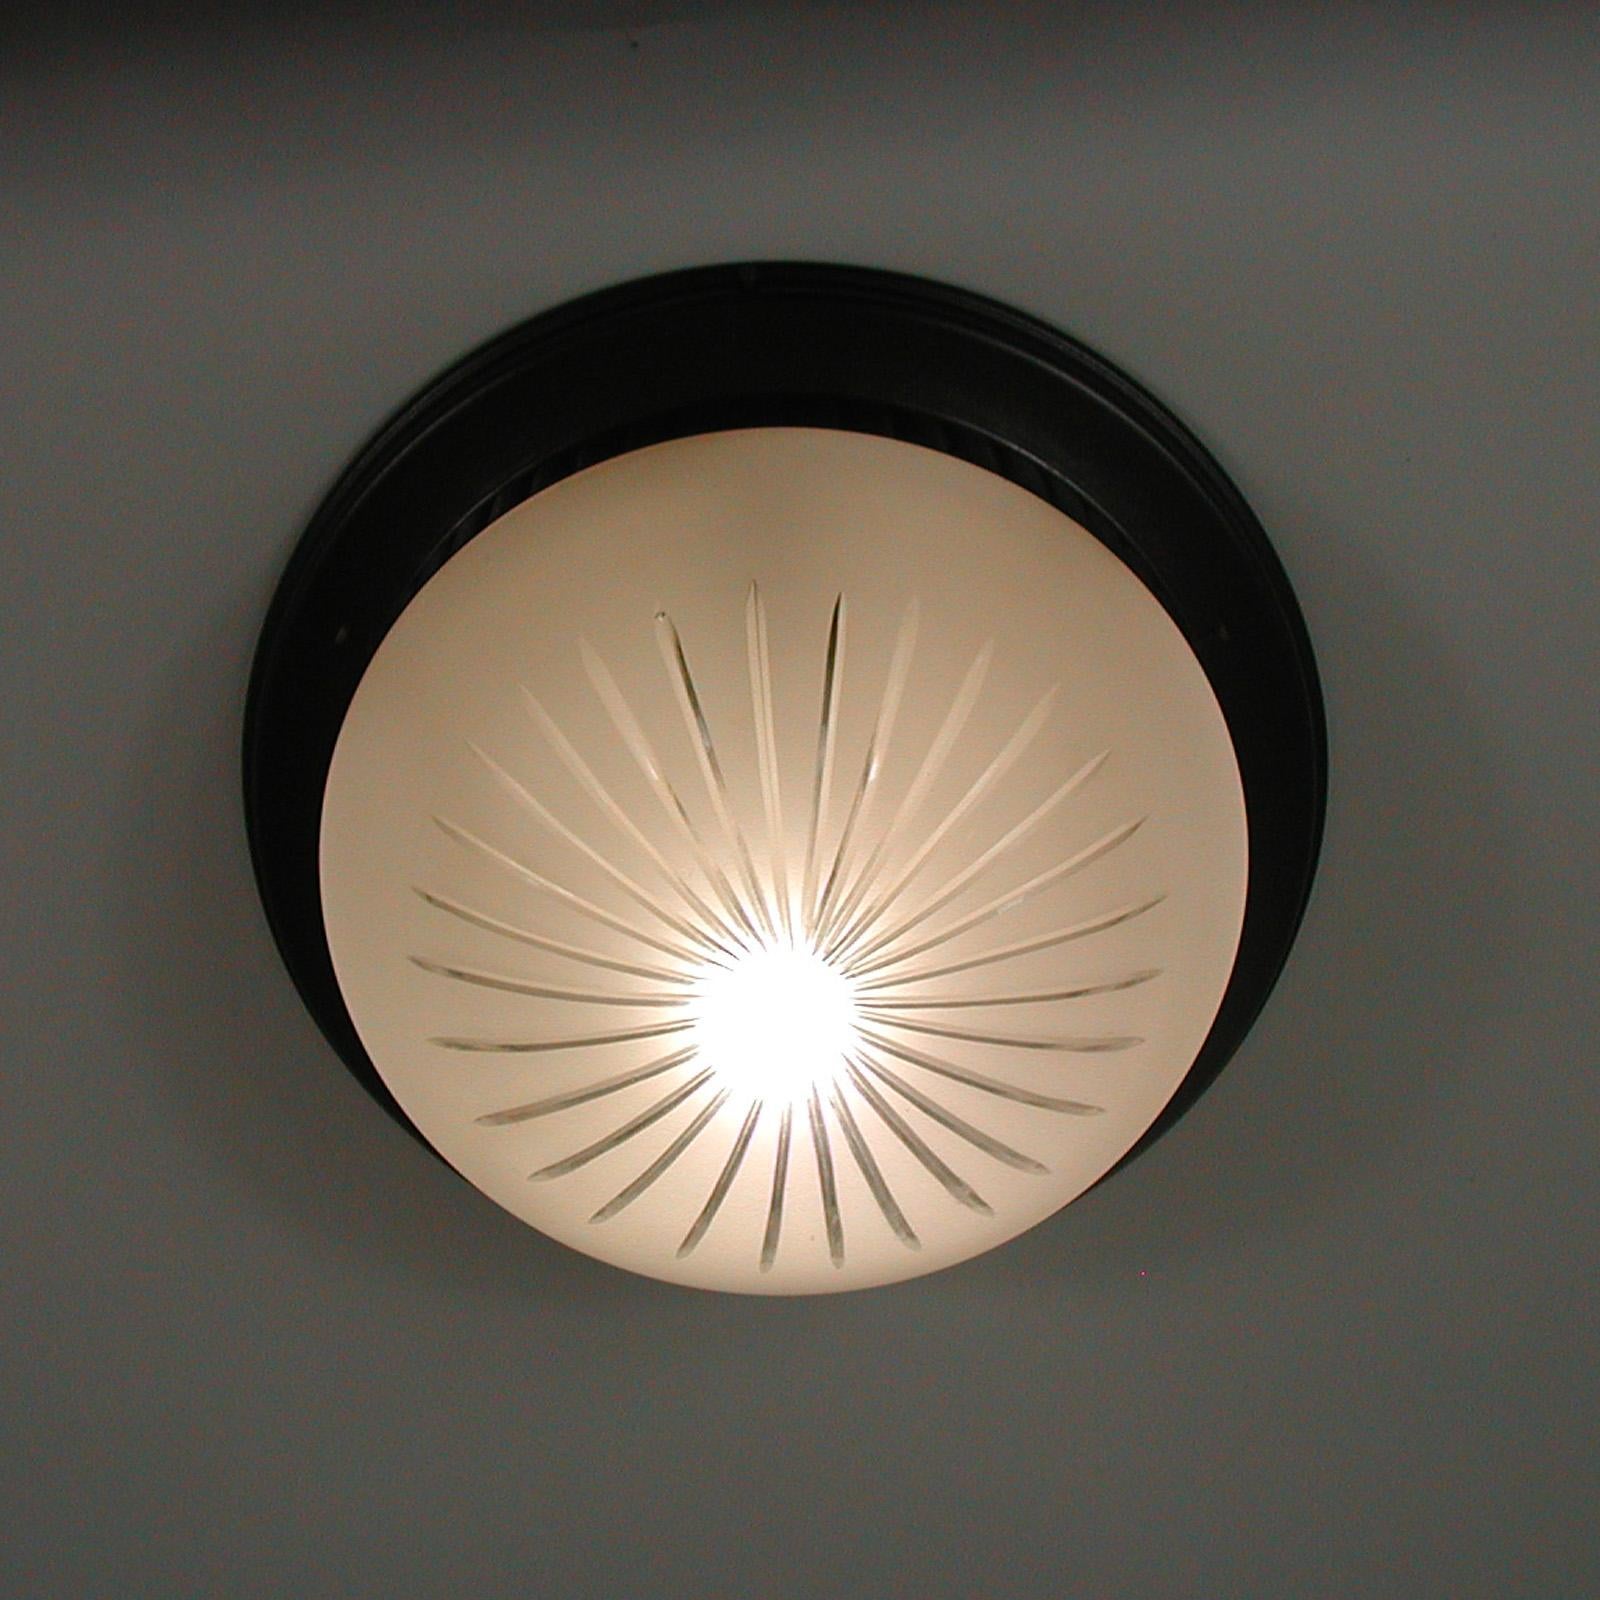 Art Deco Bronzed Metal and Satin Glass Flush Mount, Austria, 1910 to 1920 For Sale 6